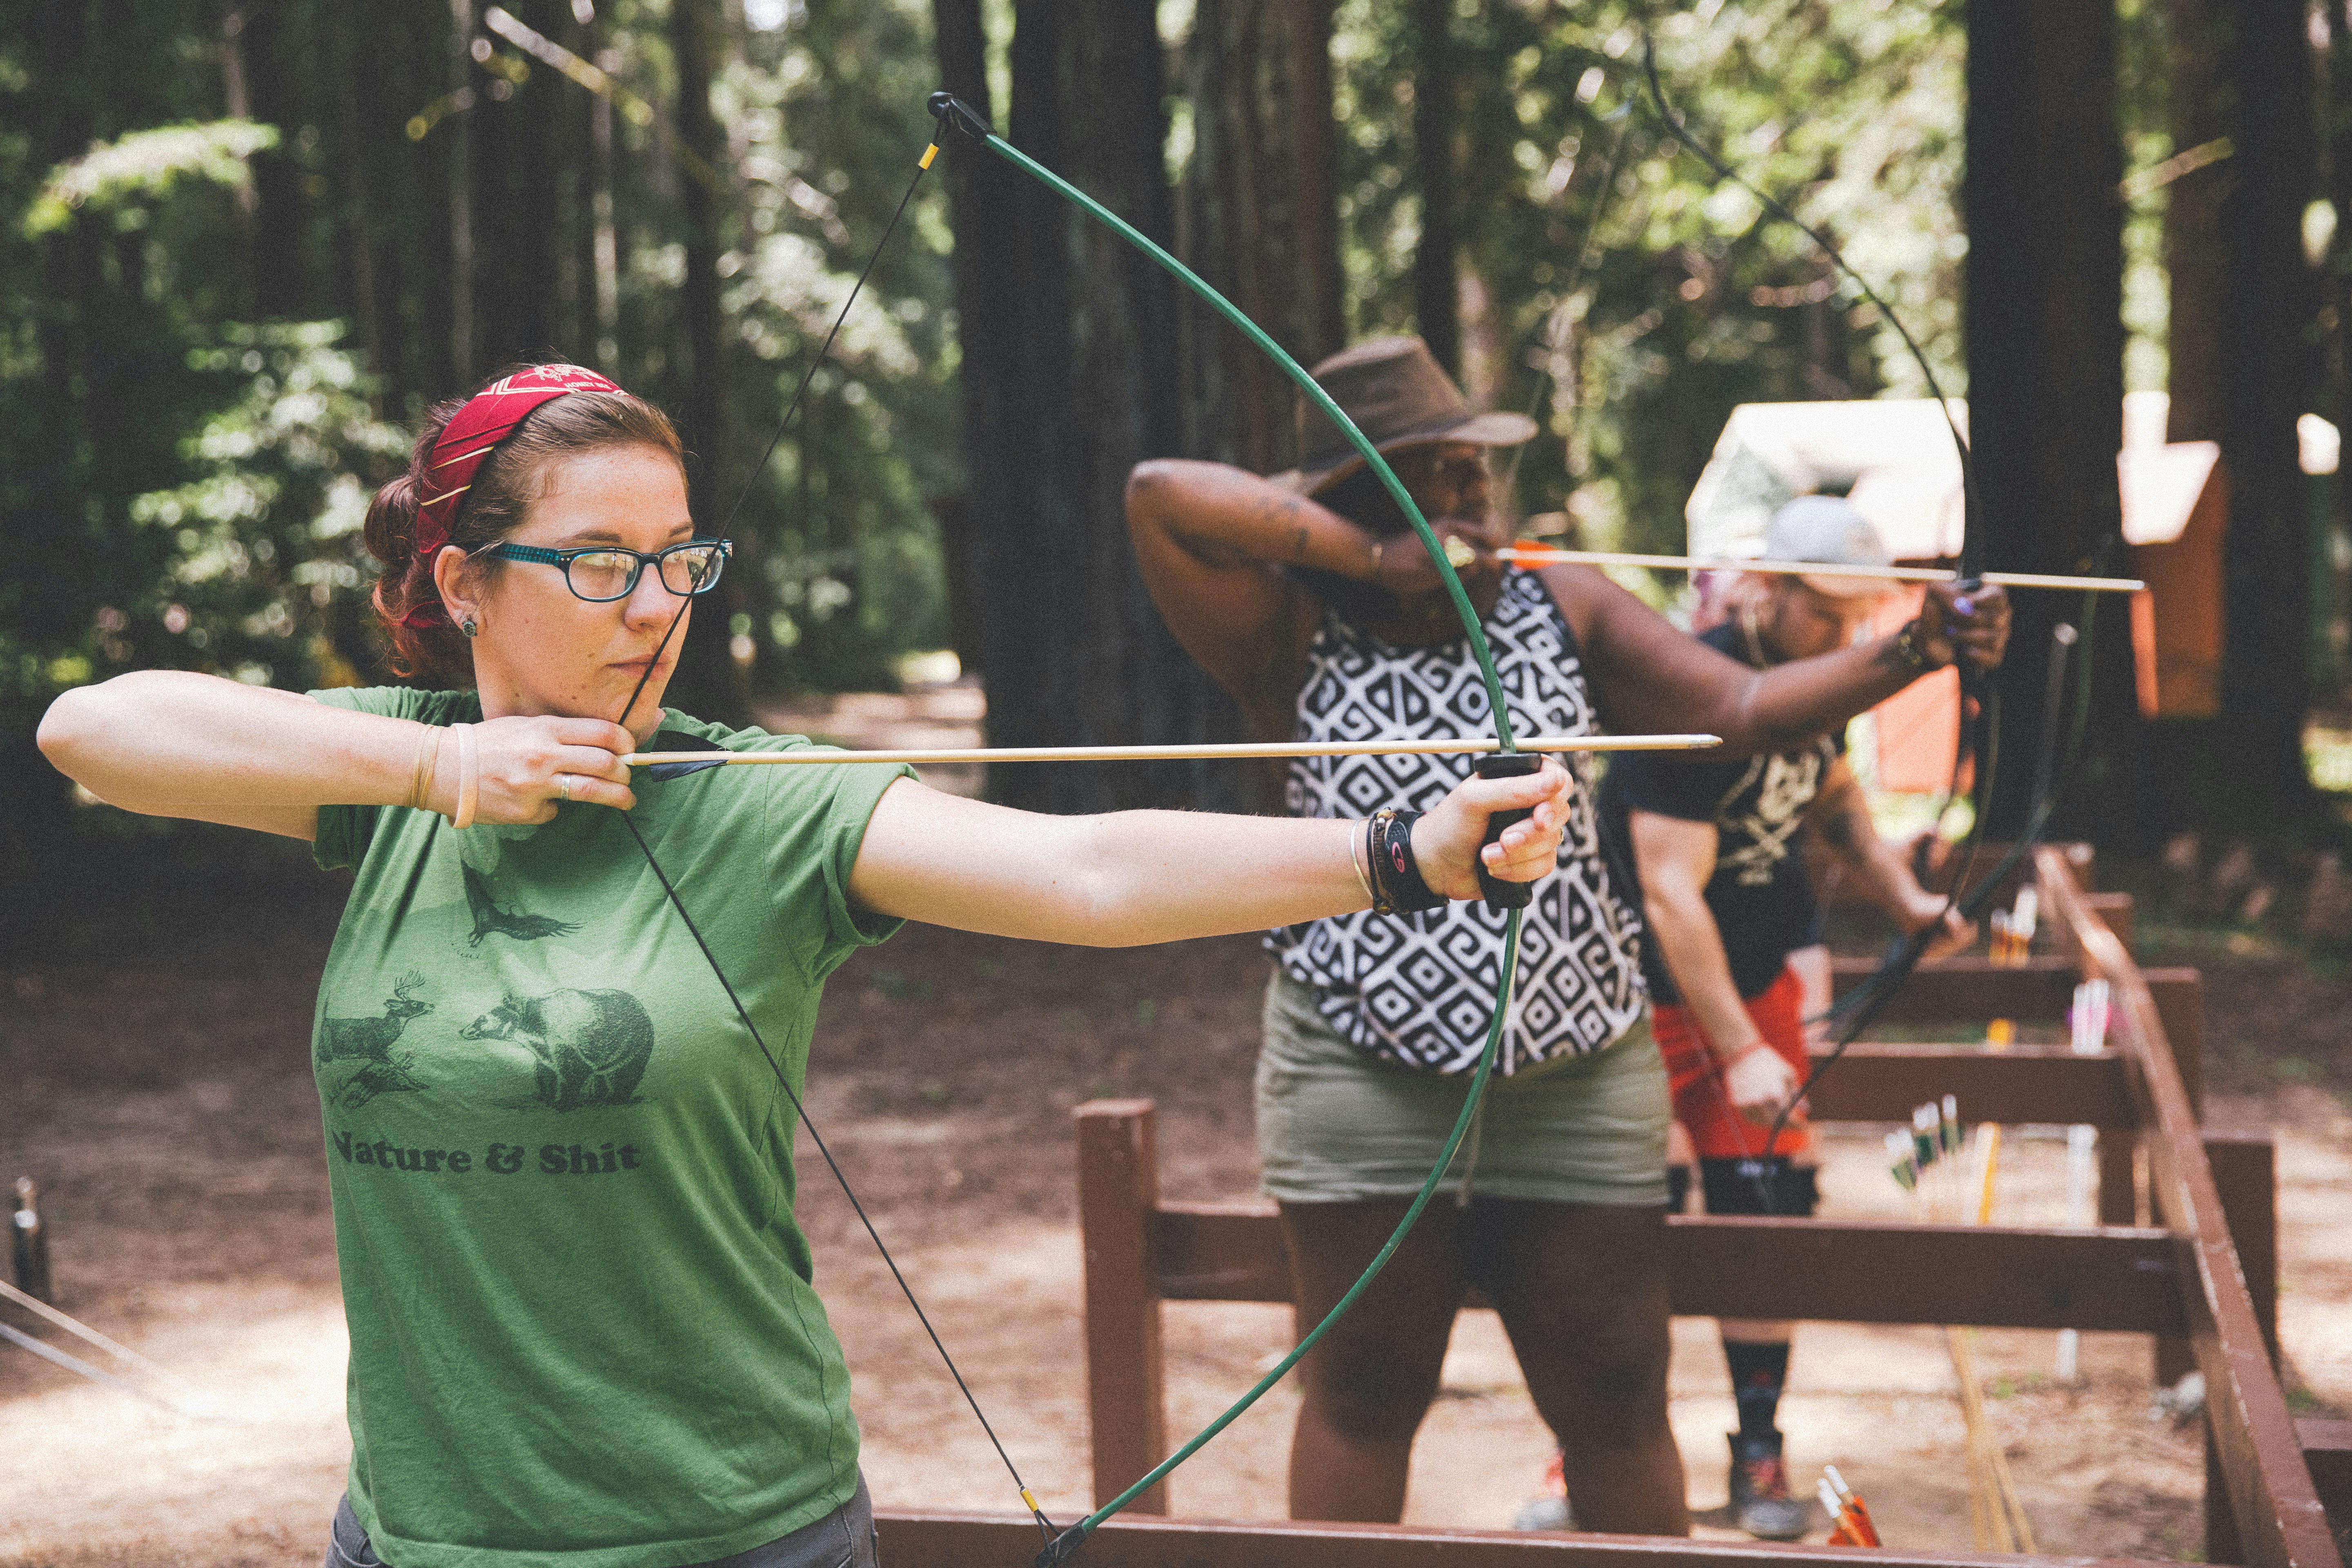 Three people with bows and arrows, shooting